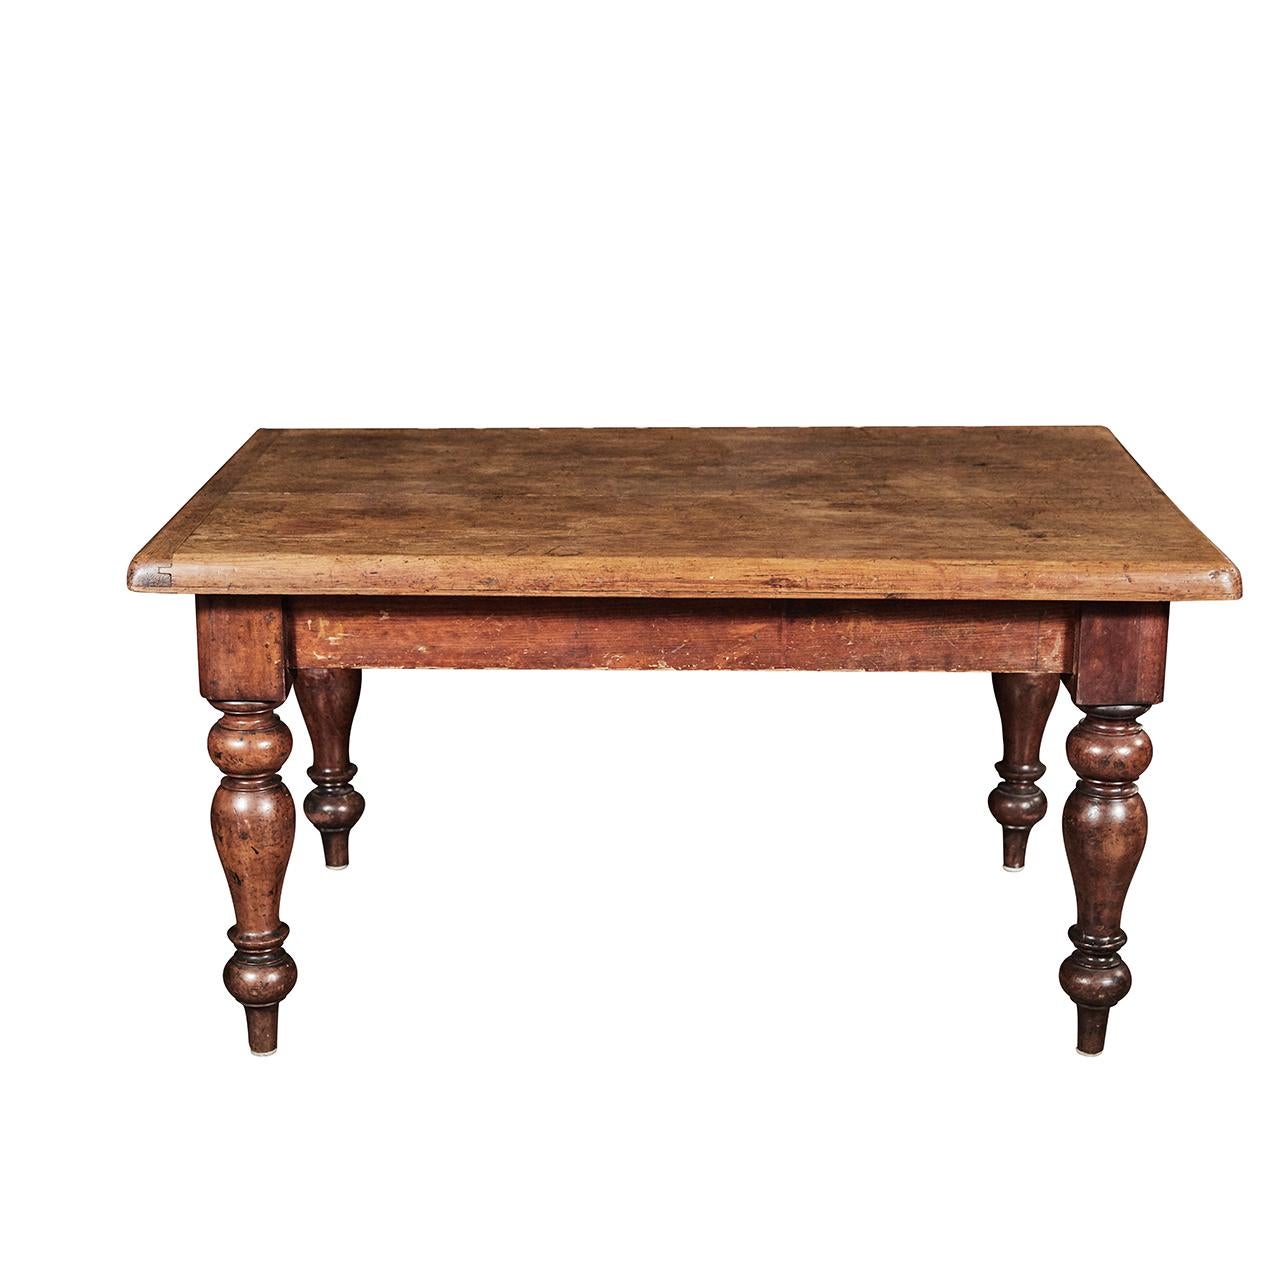 Large Pine Rustic Dining Table In Distressed Condition For Sale In Culver City, CA